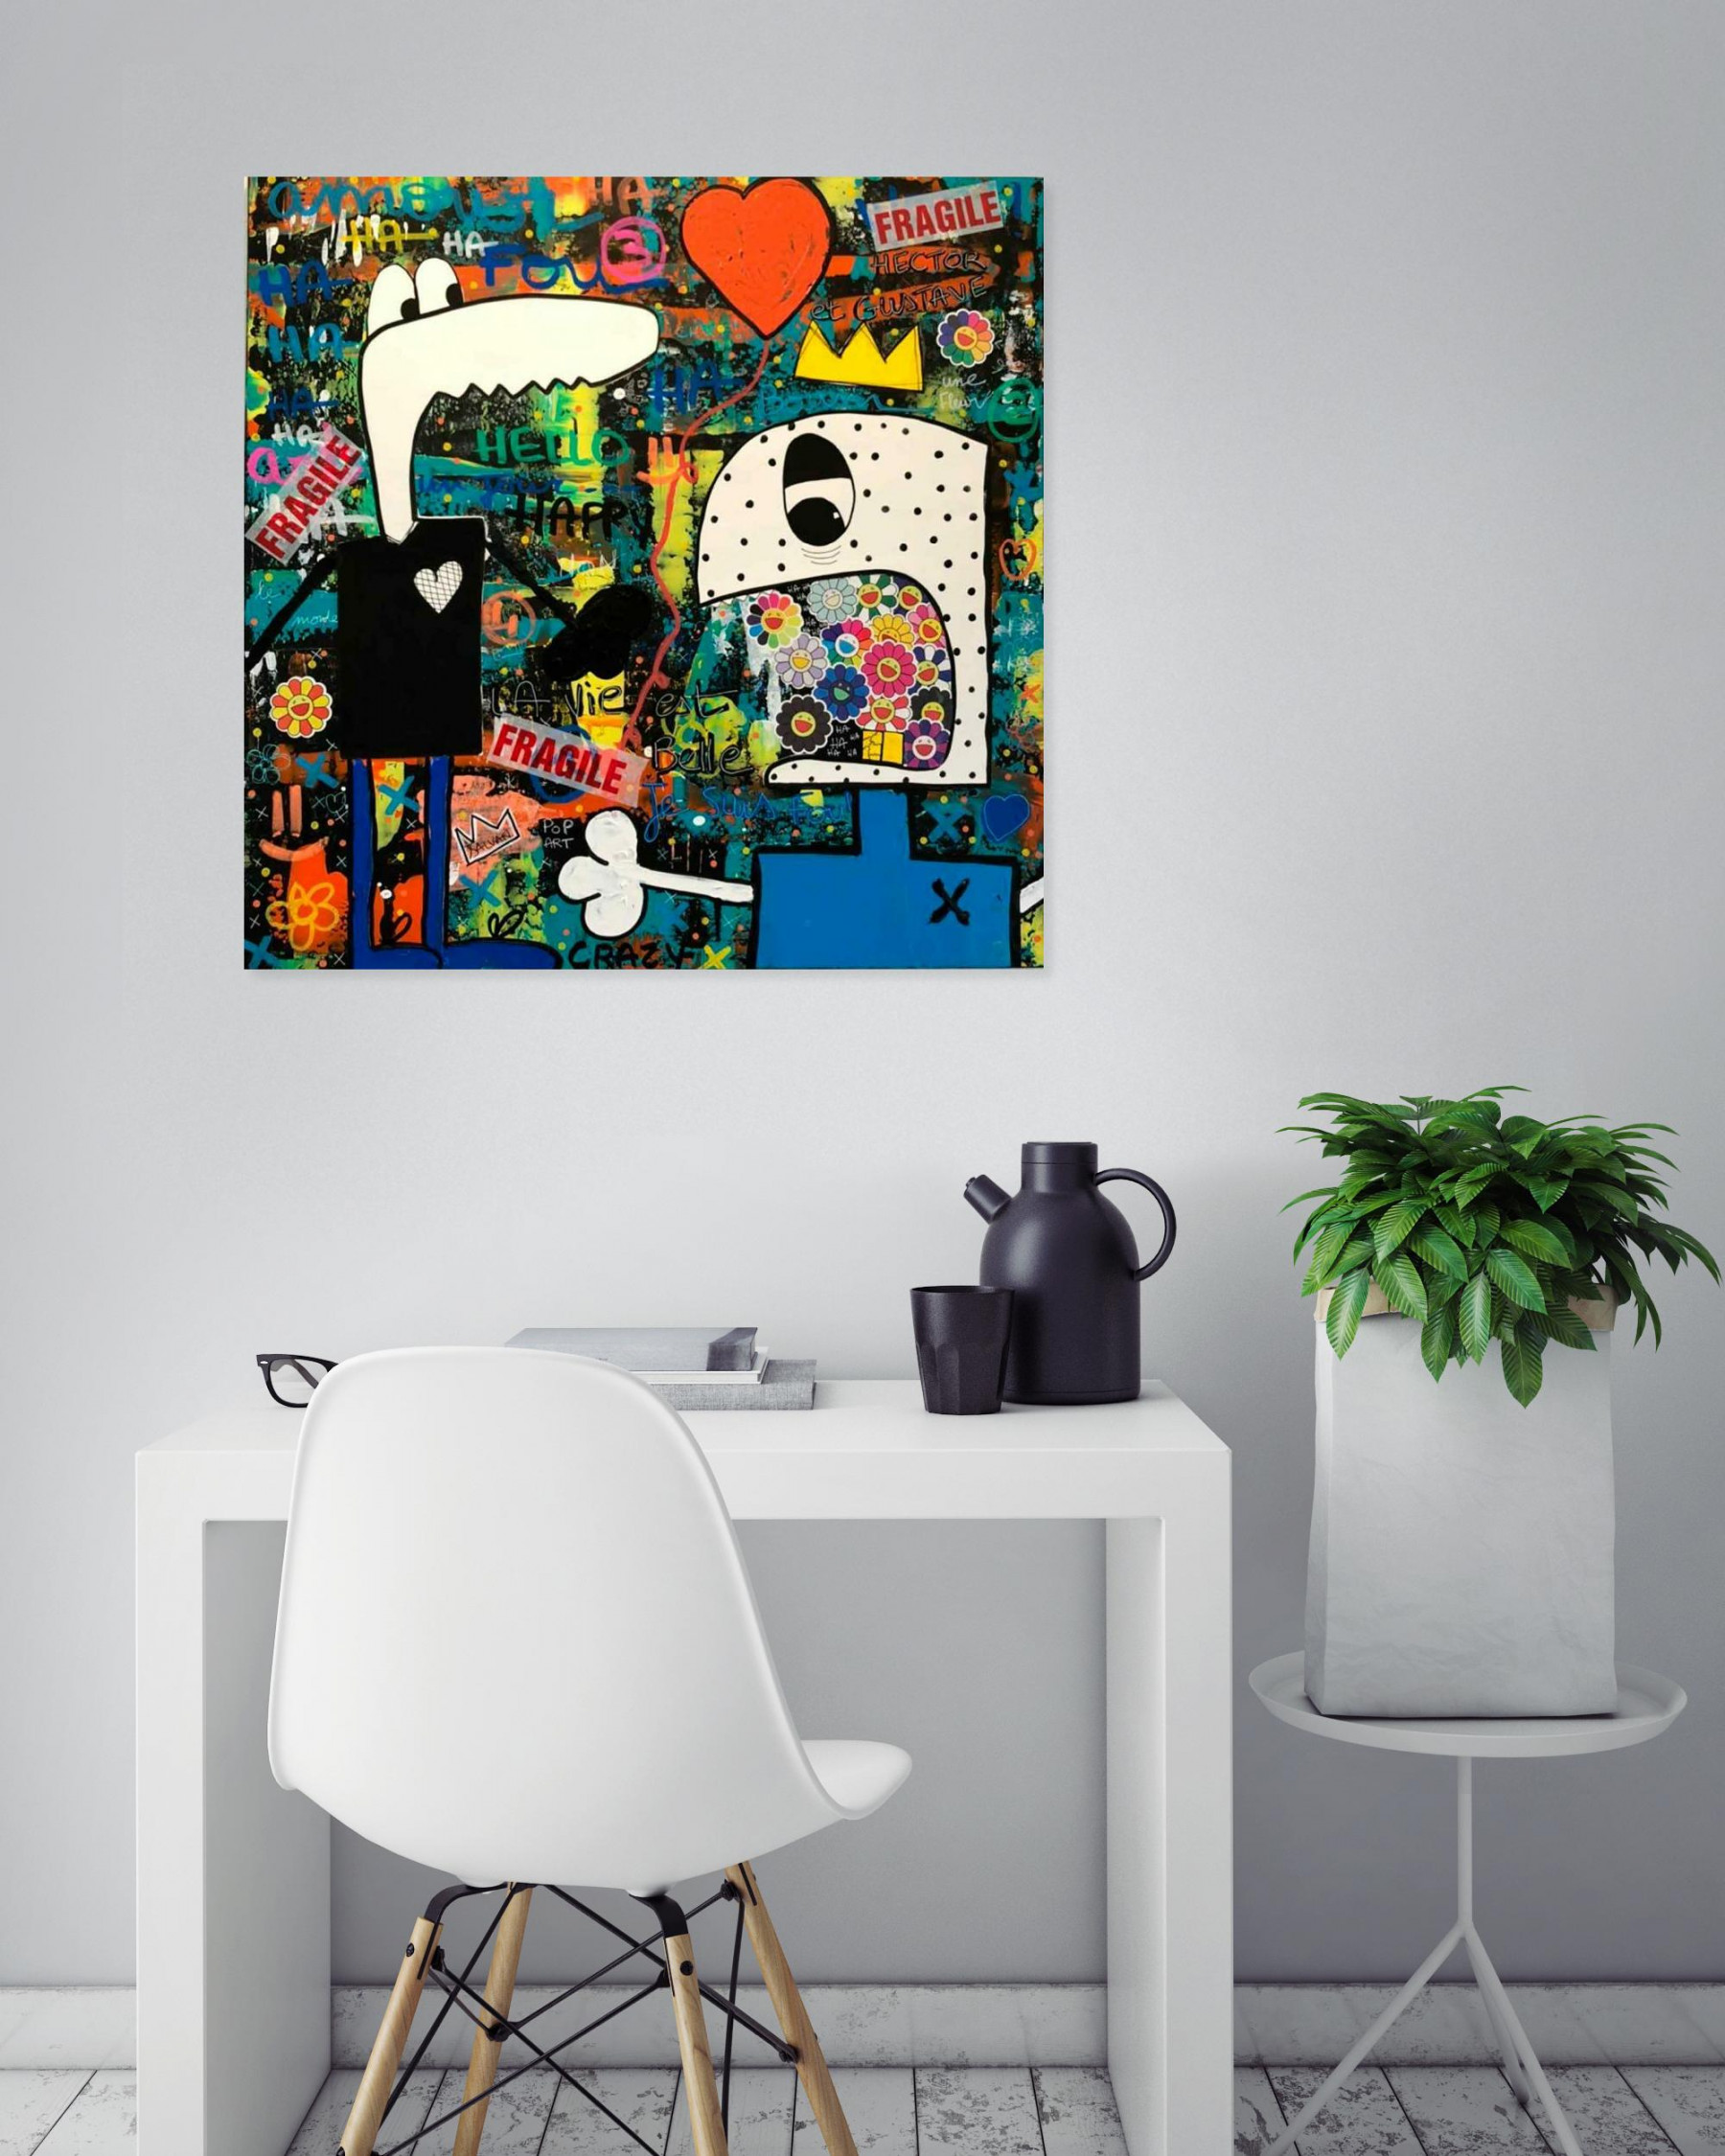 Contemporary Art - Mixed media on canvas - Hector et Gustave - Pauline ...